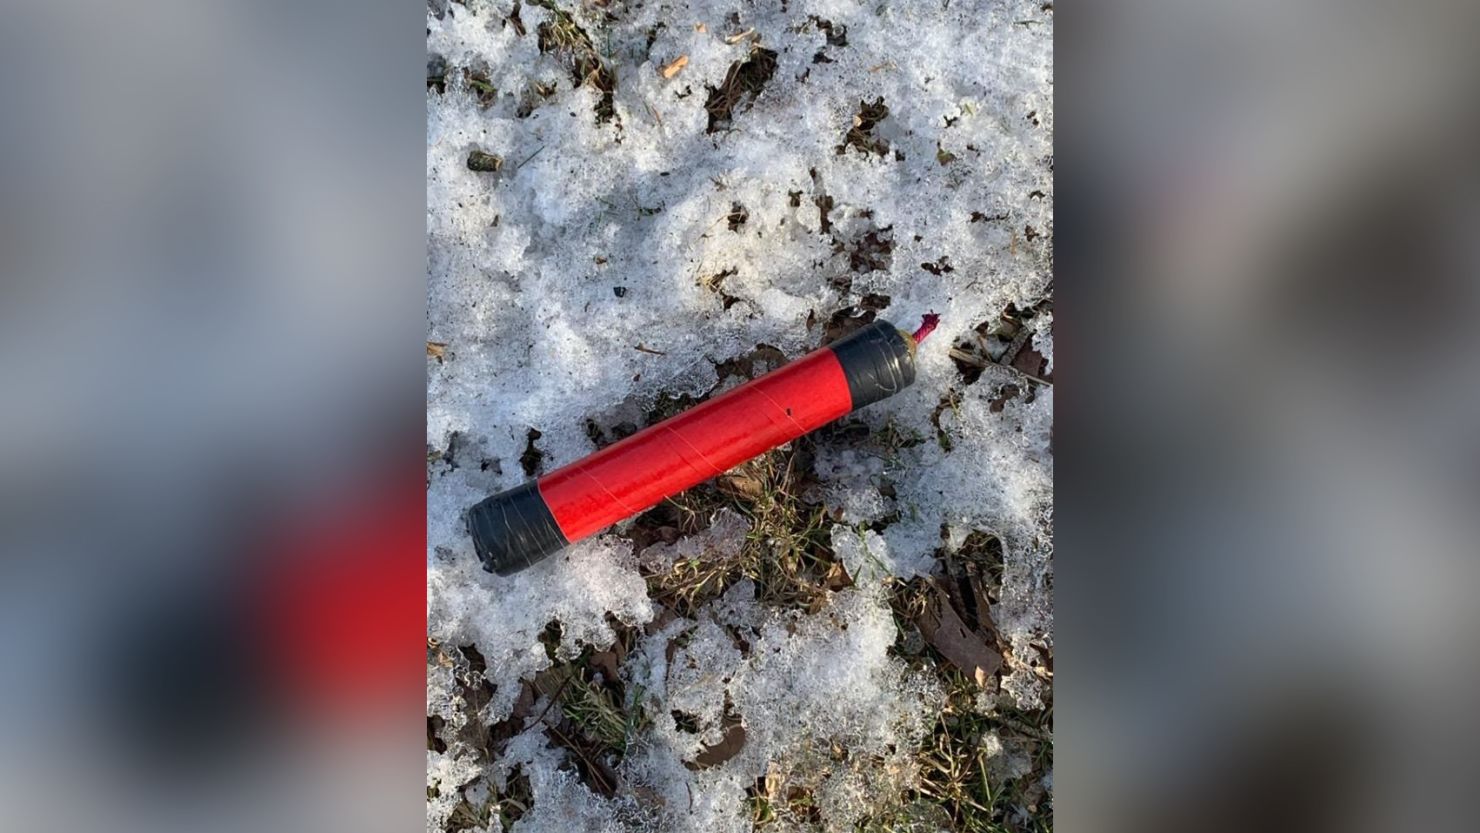 A postal carrier found this undetonated bomb in the township Tuesday, police said.